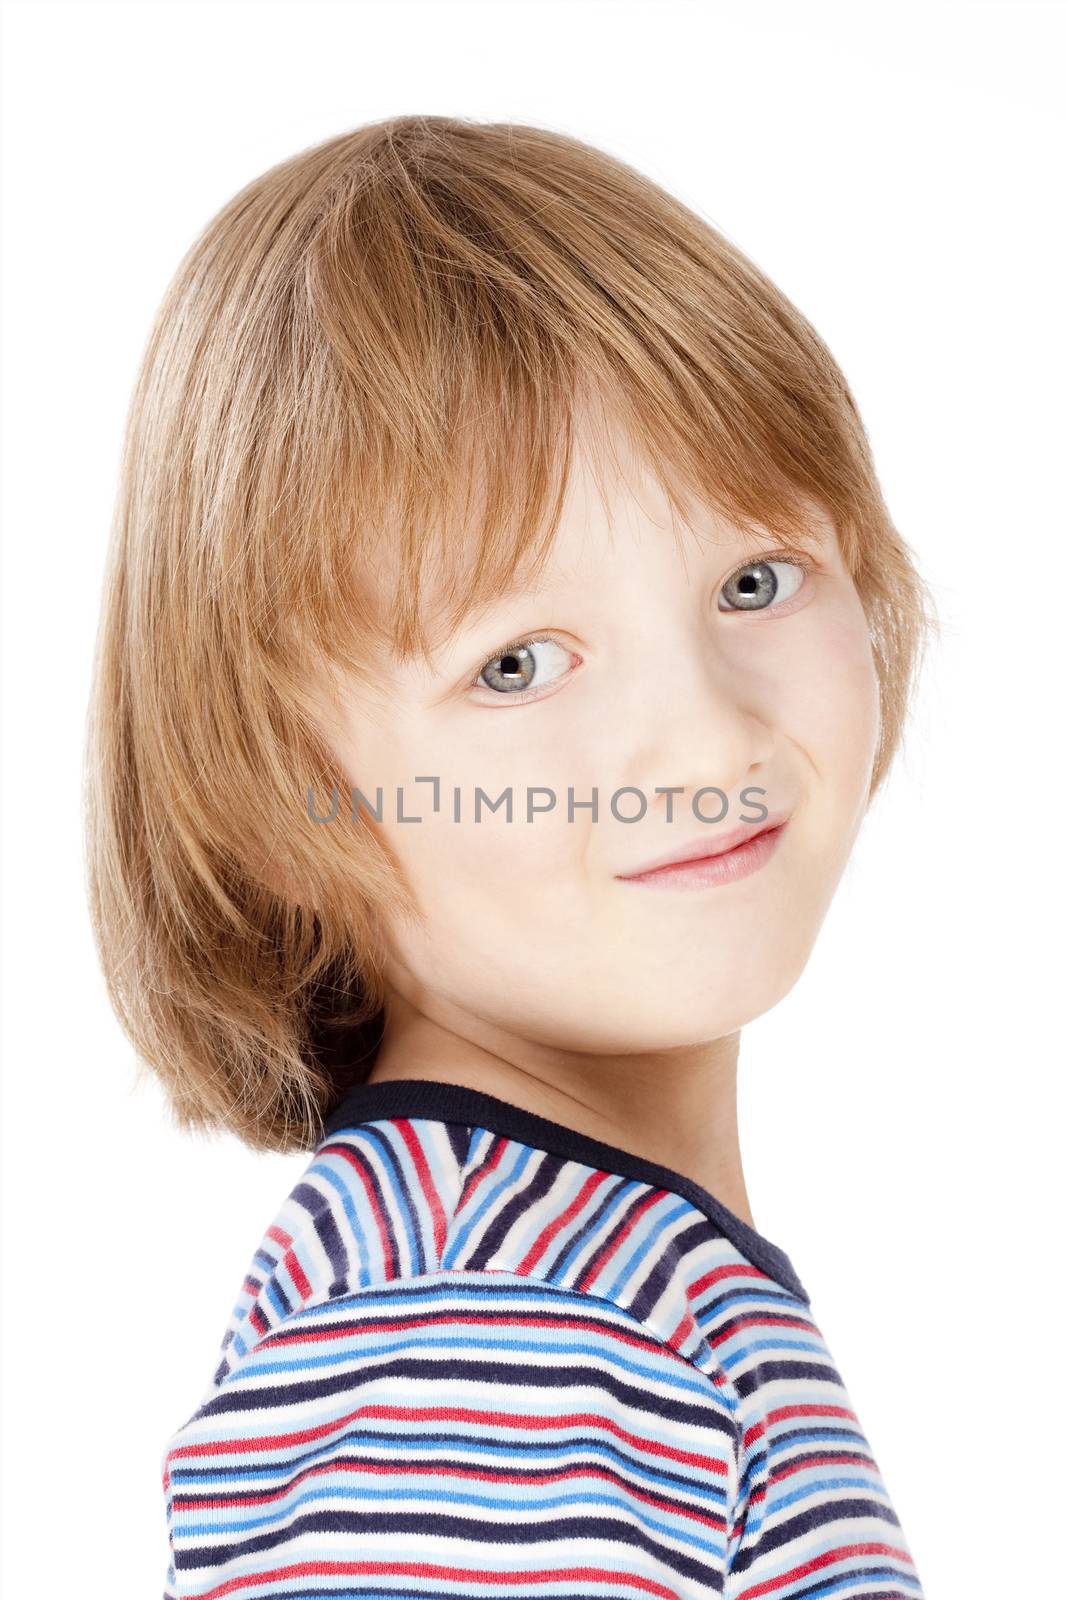 Portrait of a Boy with Blond Hair Looking - Isolated on White